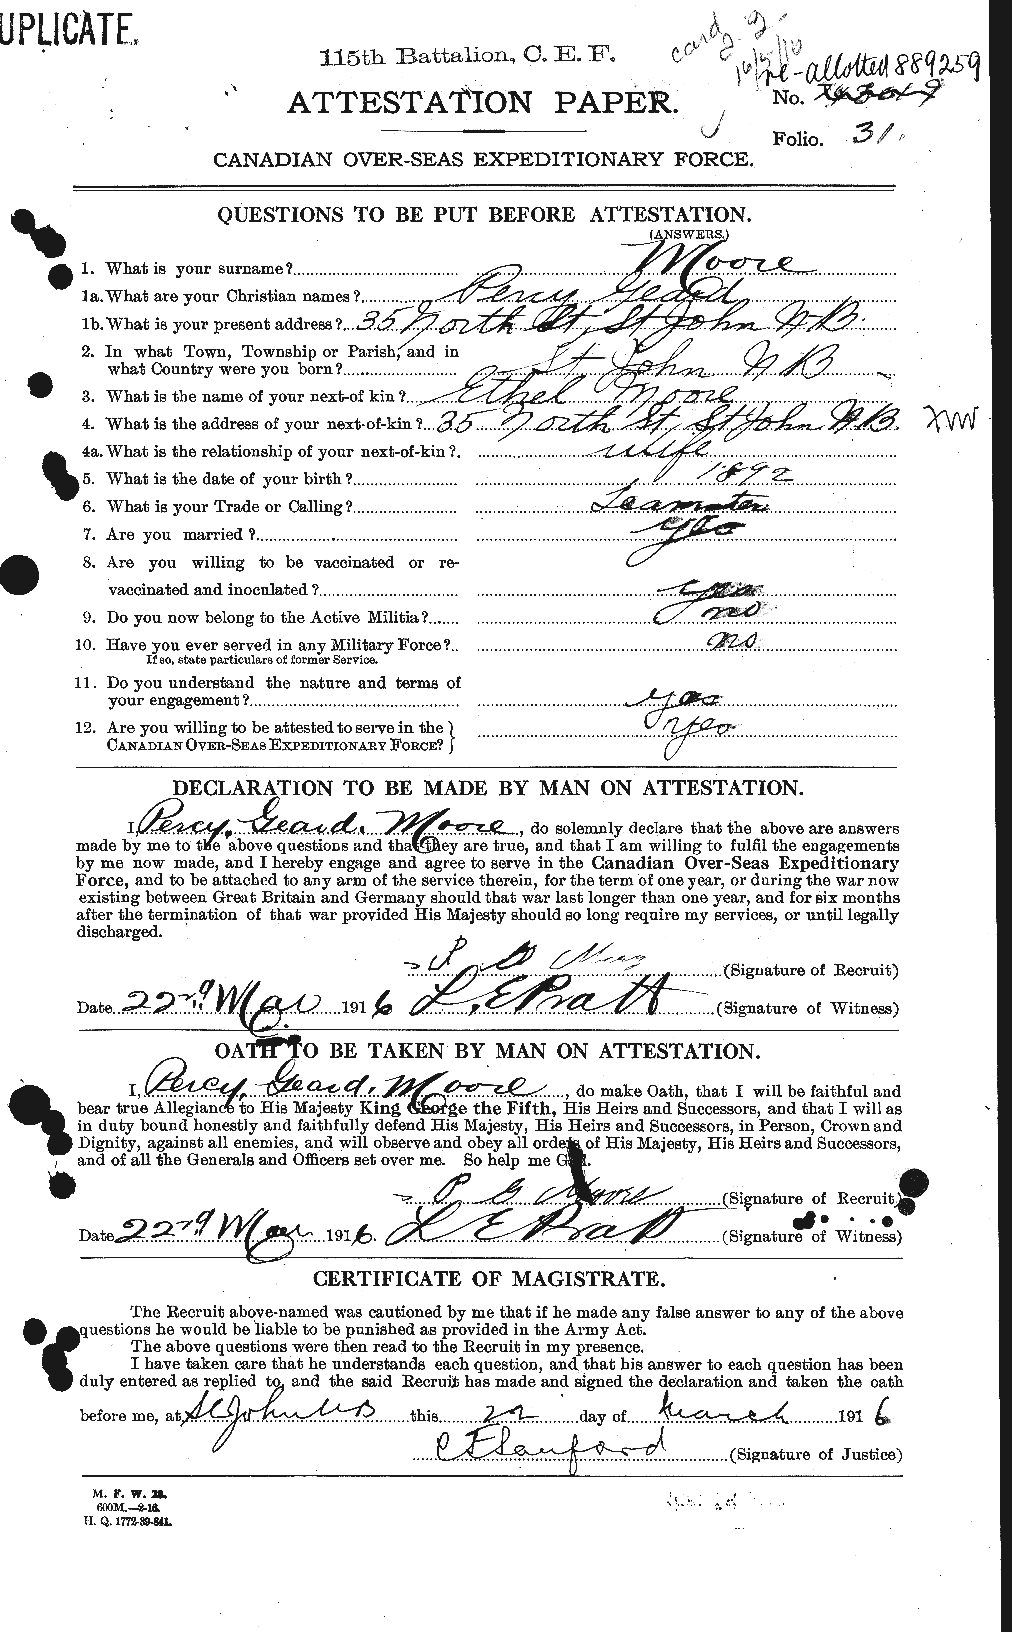 Personnel Records of the First World War - CEF 503487a